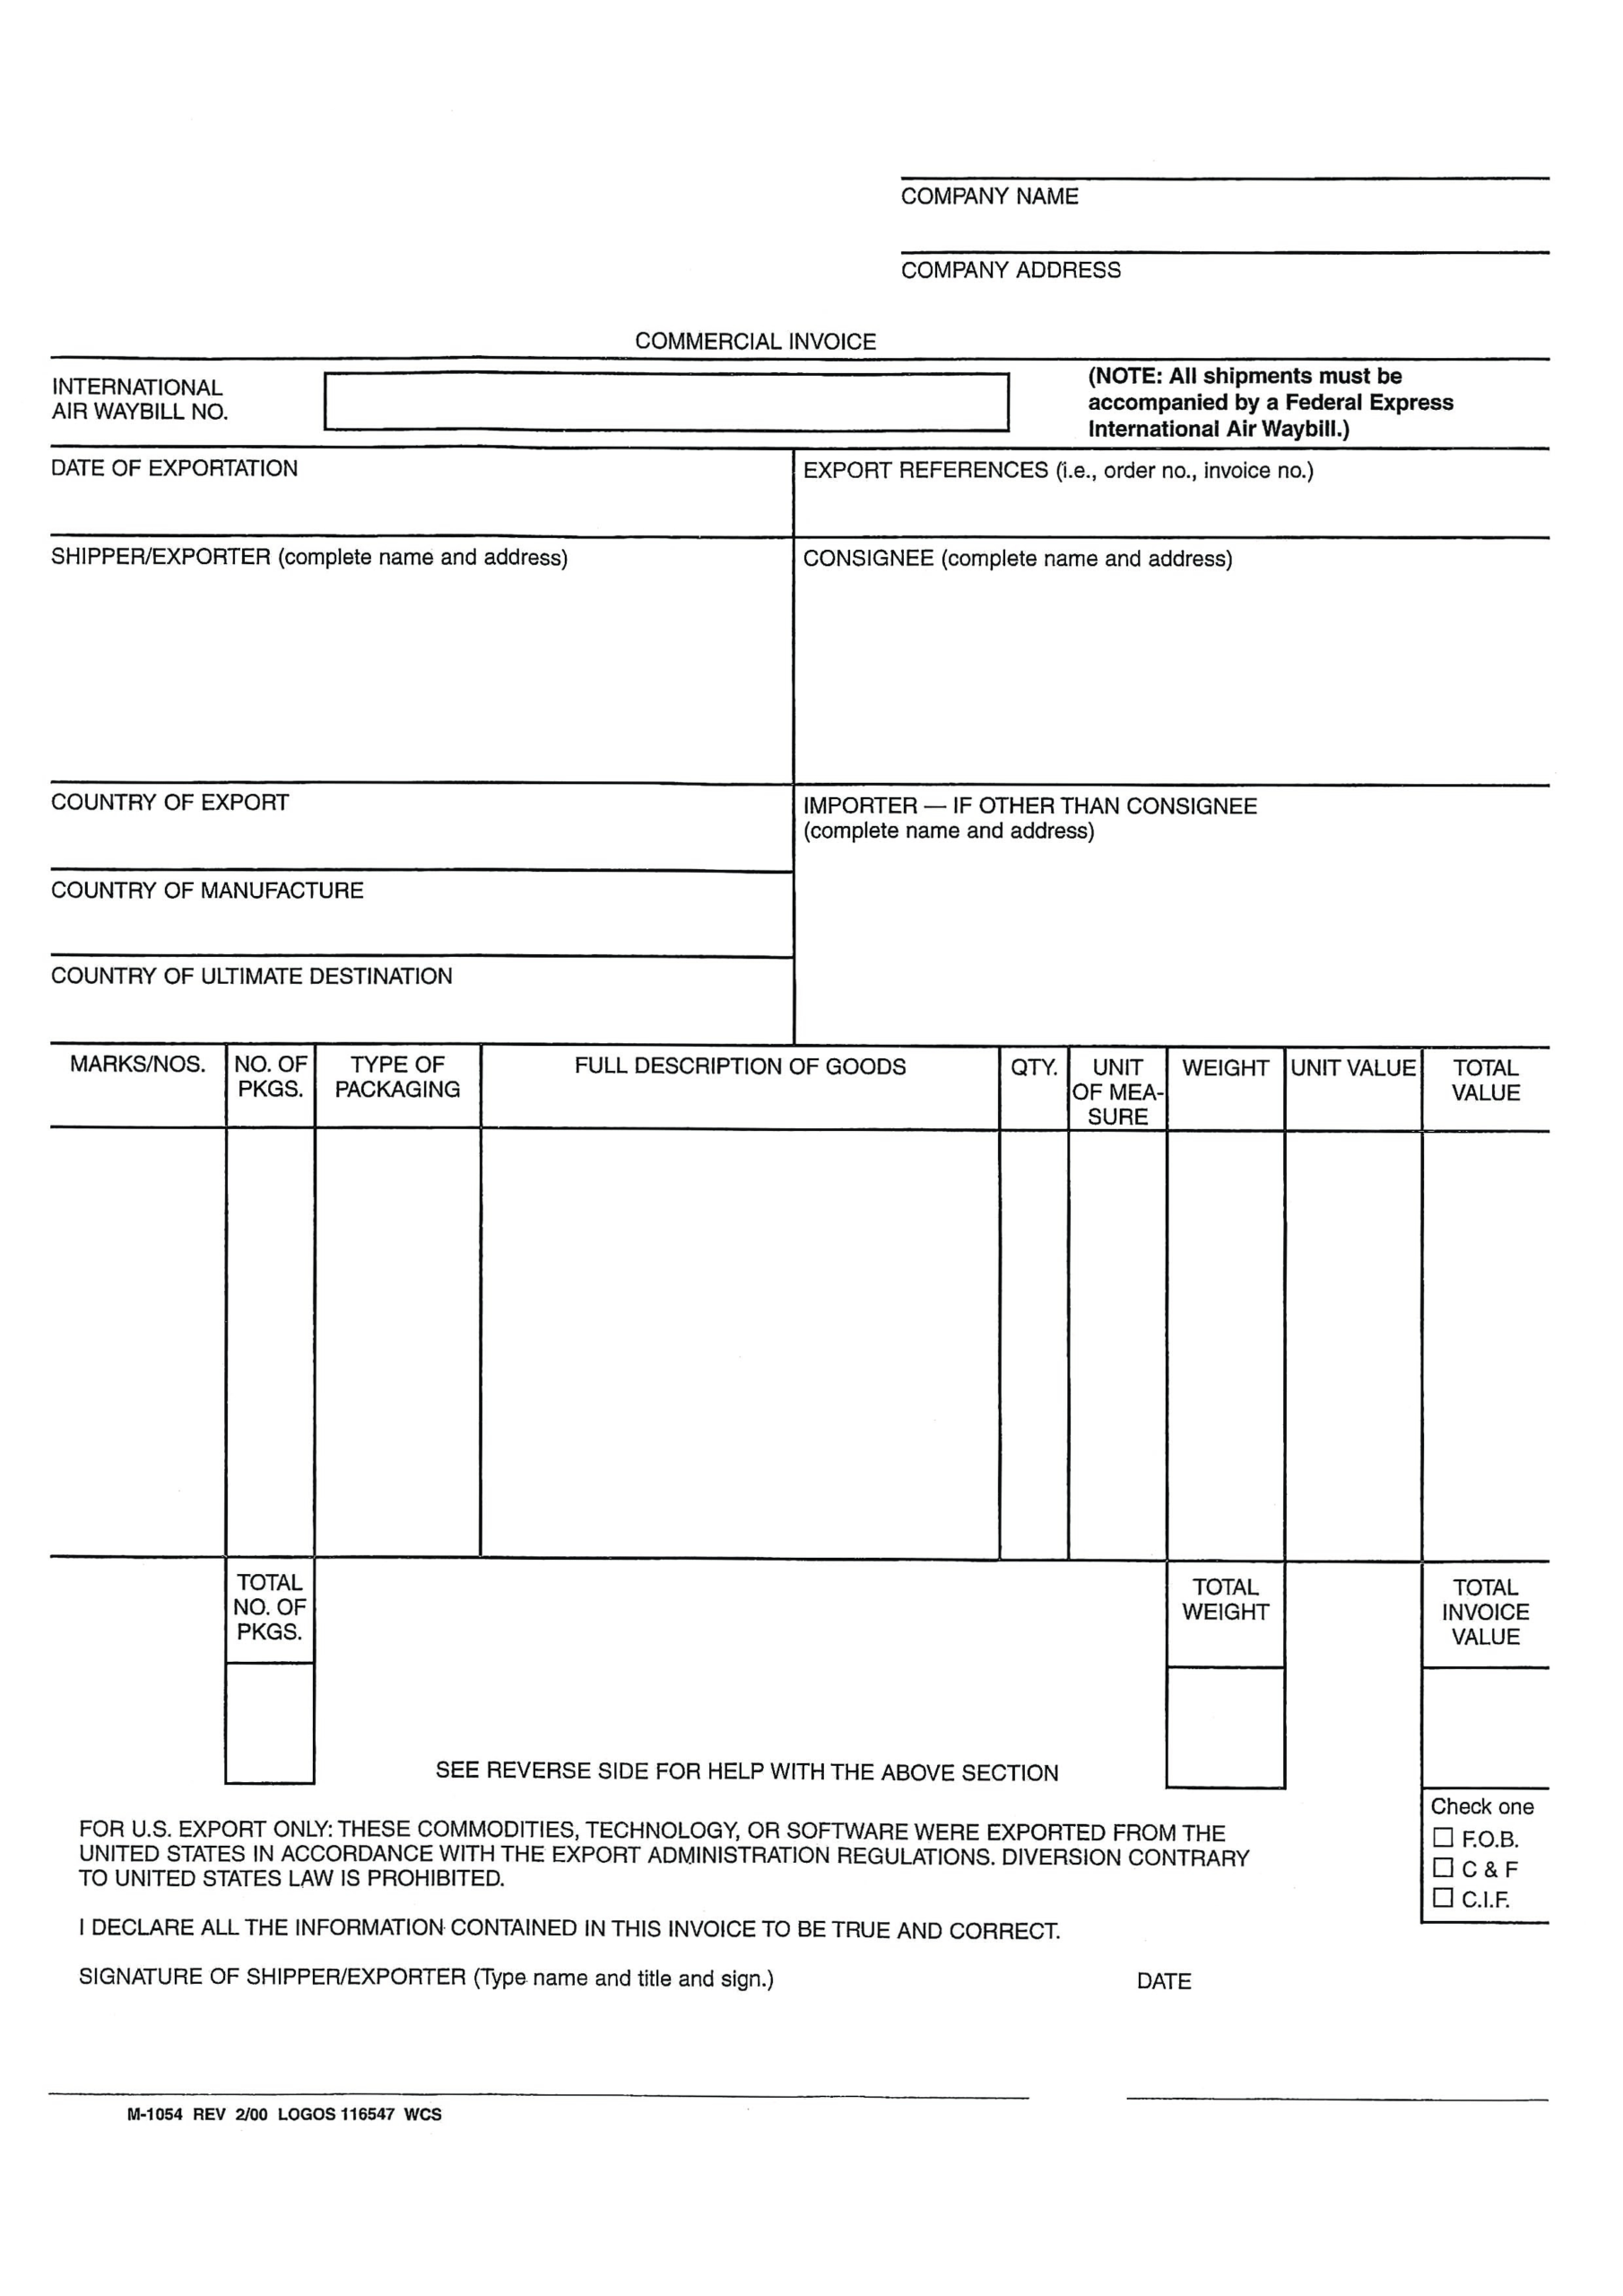 Blank Commercial Invoice Word | Templates At Intended For Commercial Invoice Template Word Doc